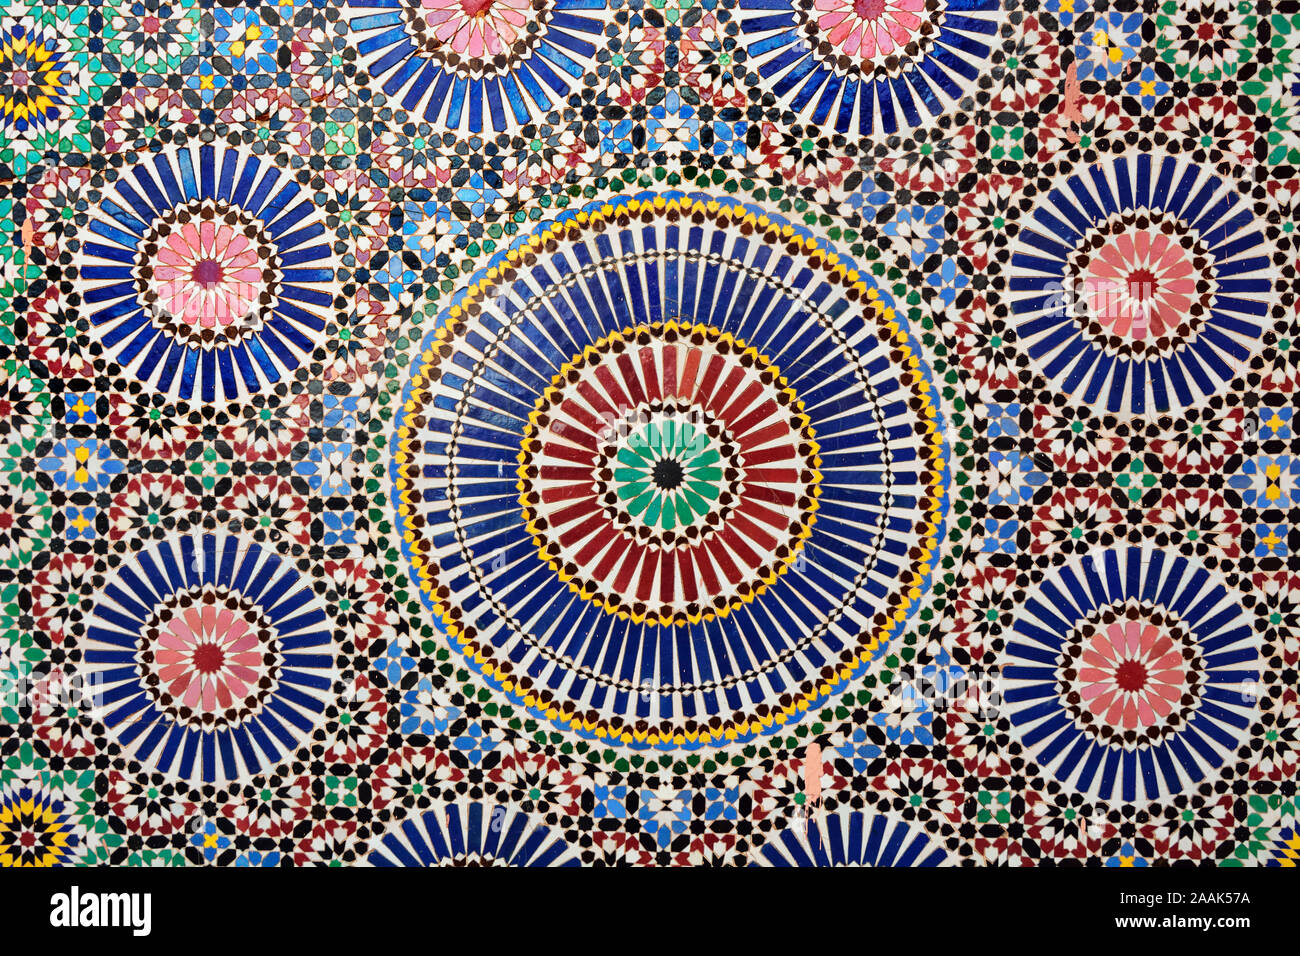 Islamic decorative tiles (zeligs) in the Marrakech Museum, a 19th Century palace inside the Medina, Marrakech, Morocco Stock Photo